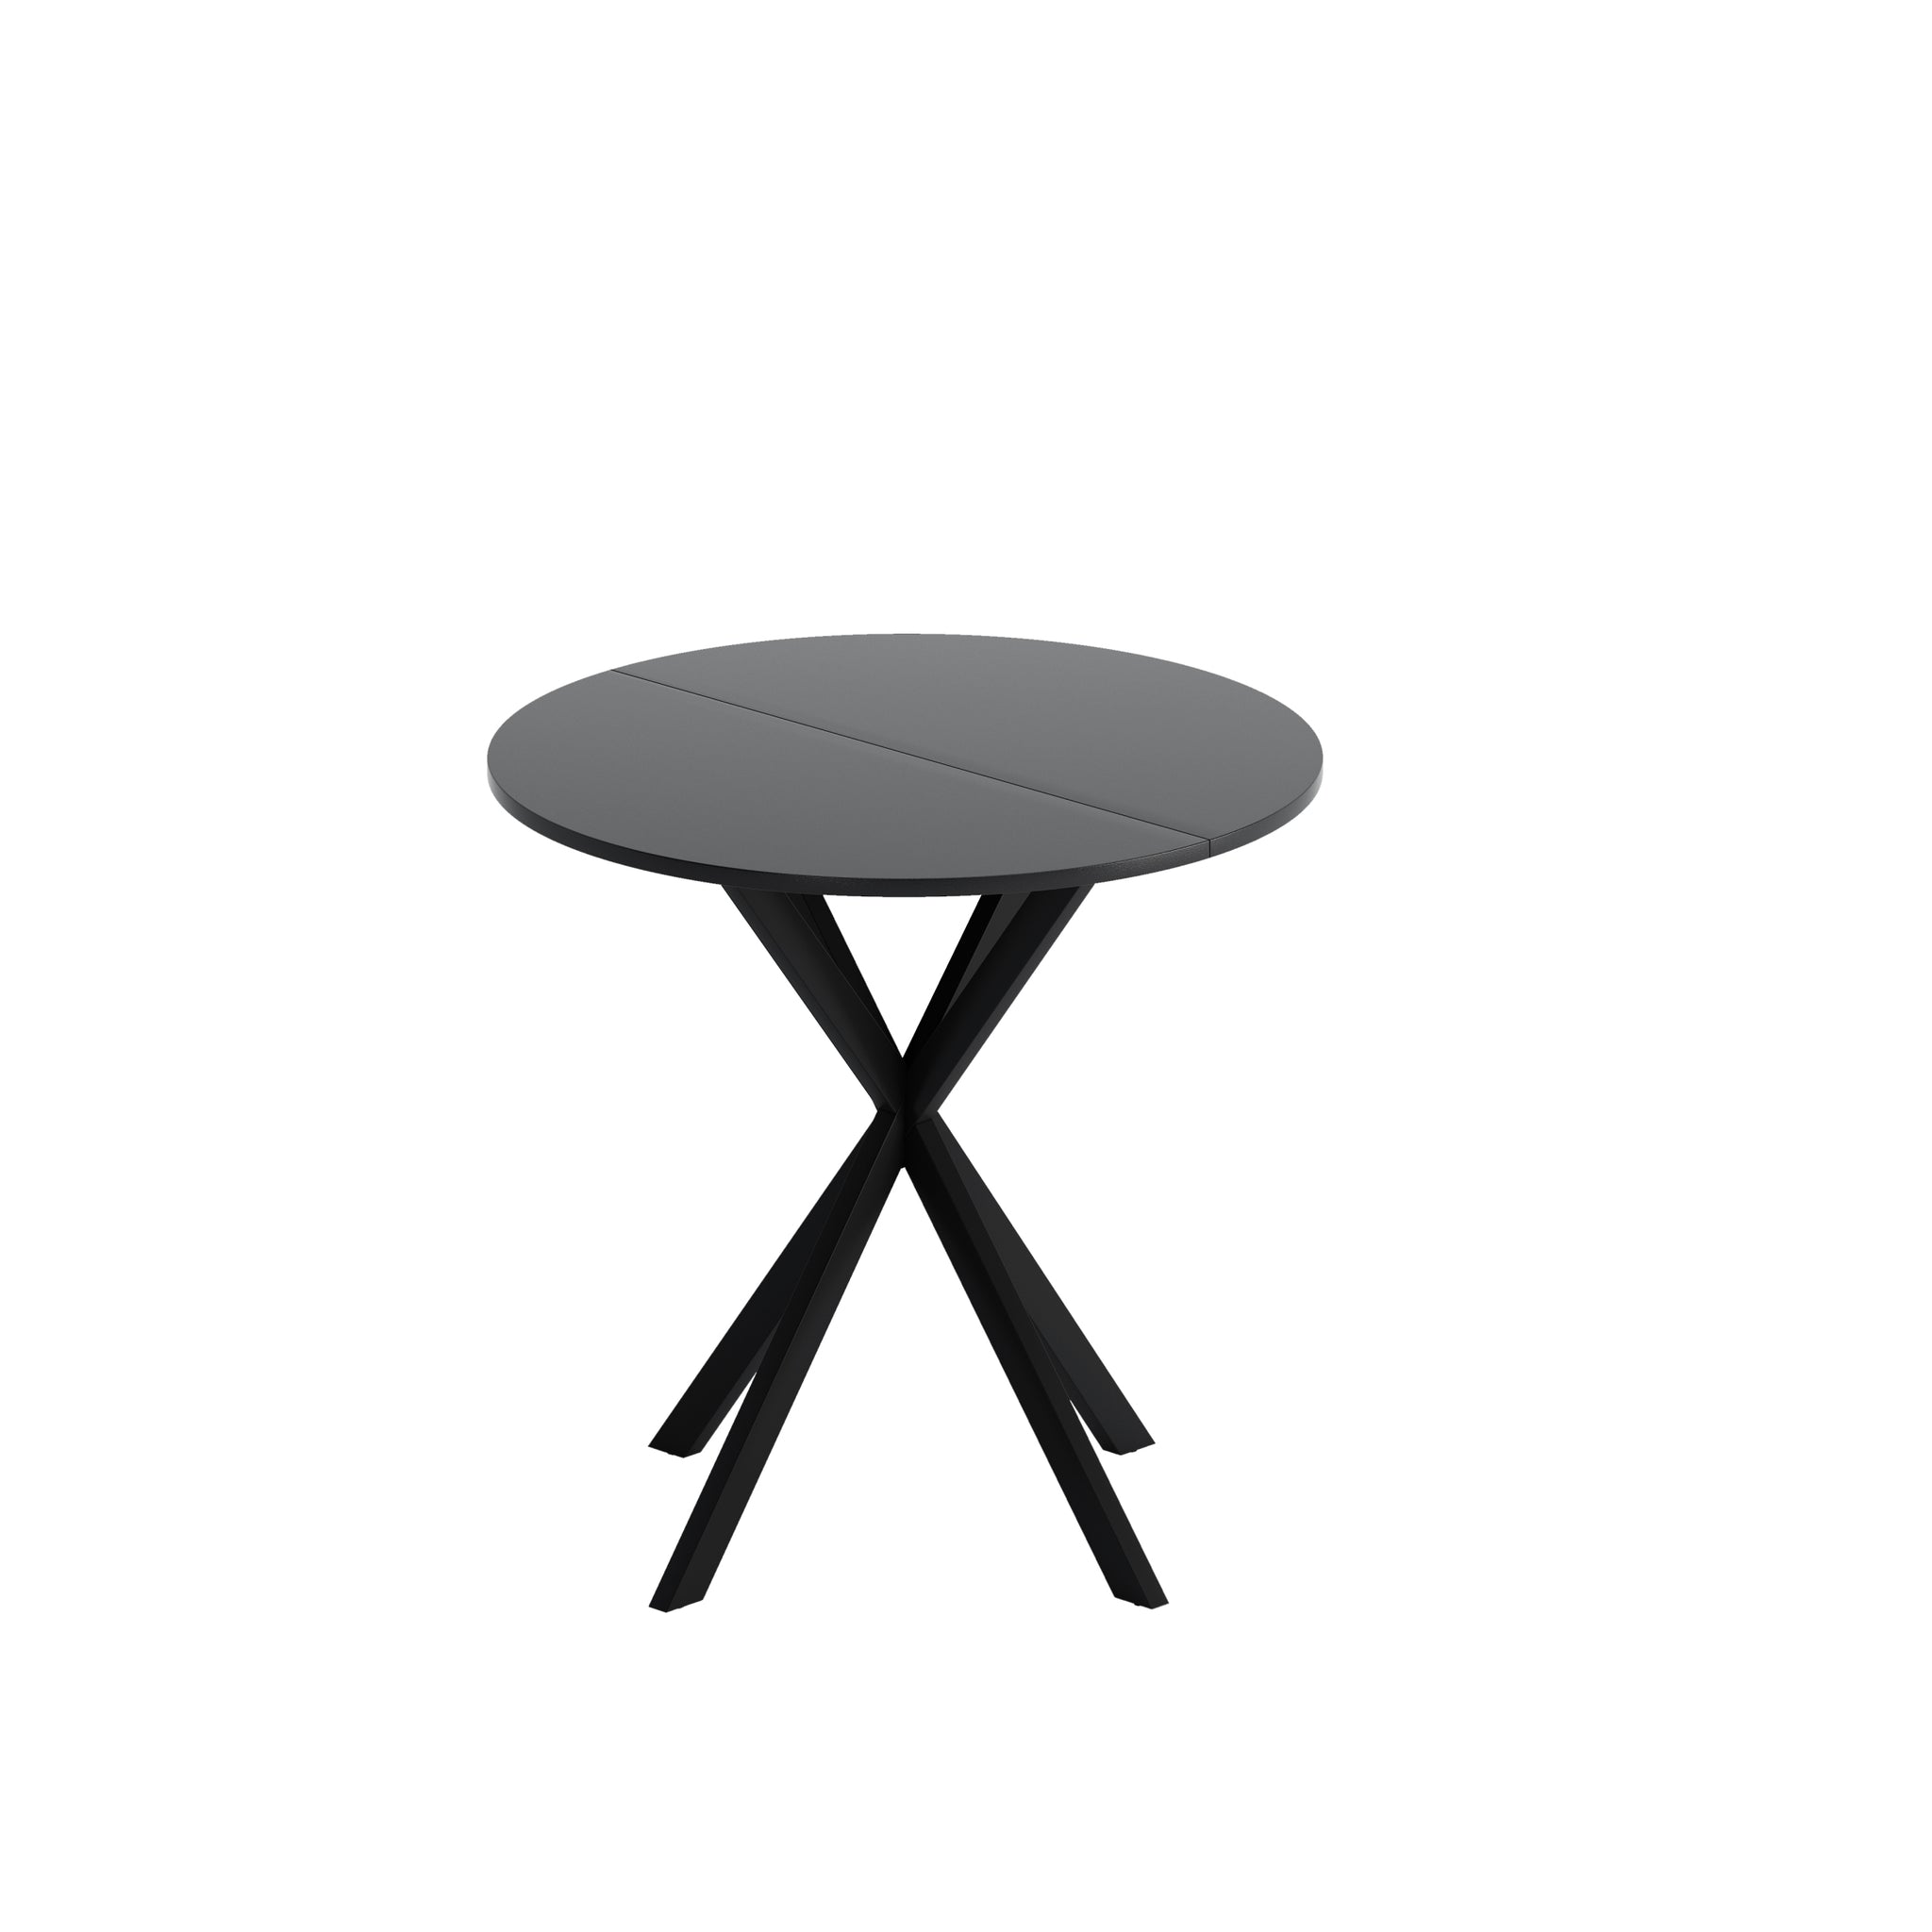 31.5'' Modern Round Dining Table with Crossed Legs black-mdf+metal